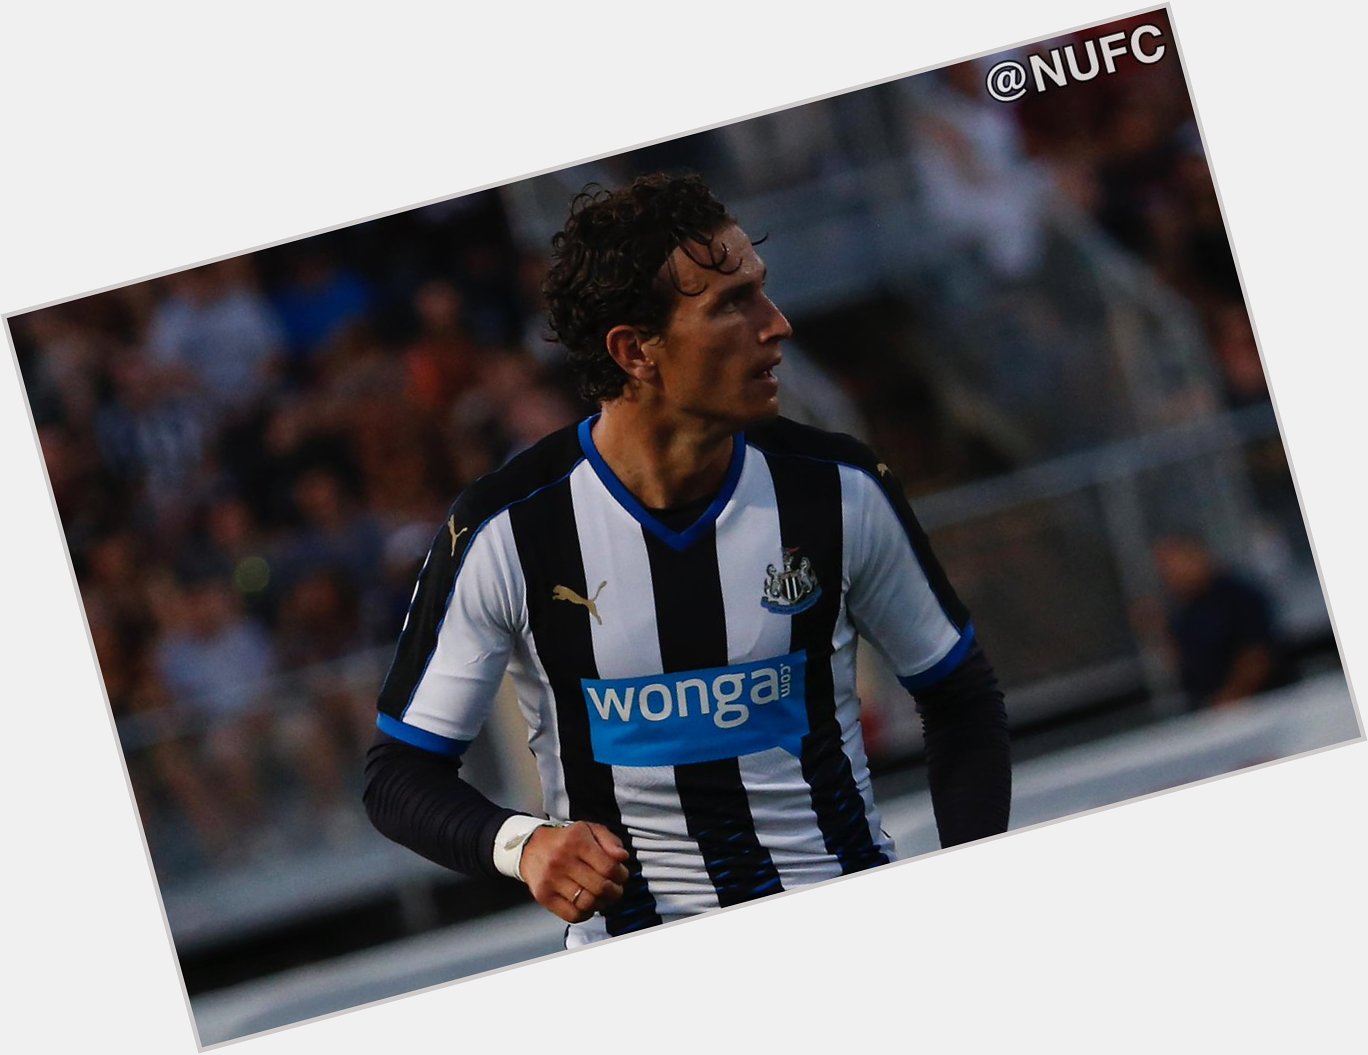 A very happy birthday to and defender Daryl Janmaat - 26 today! 